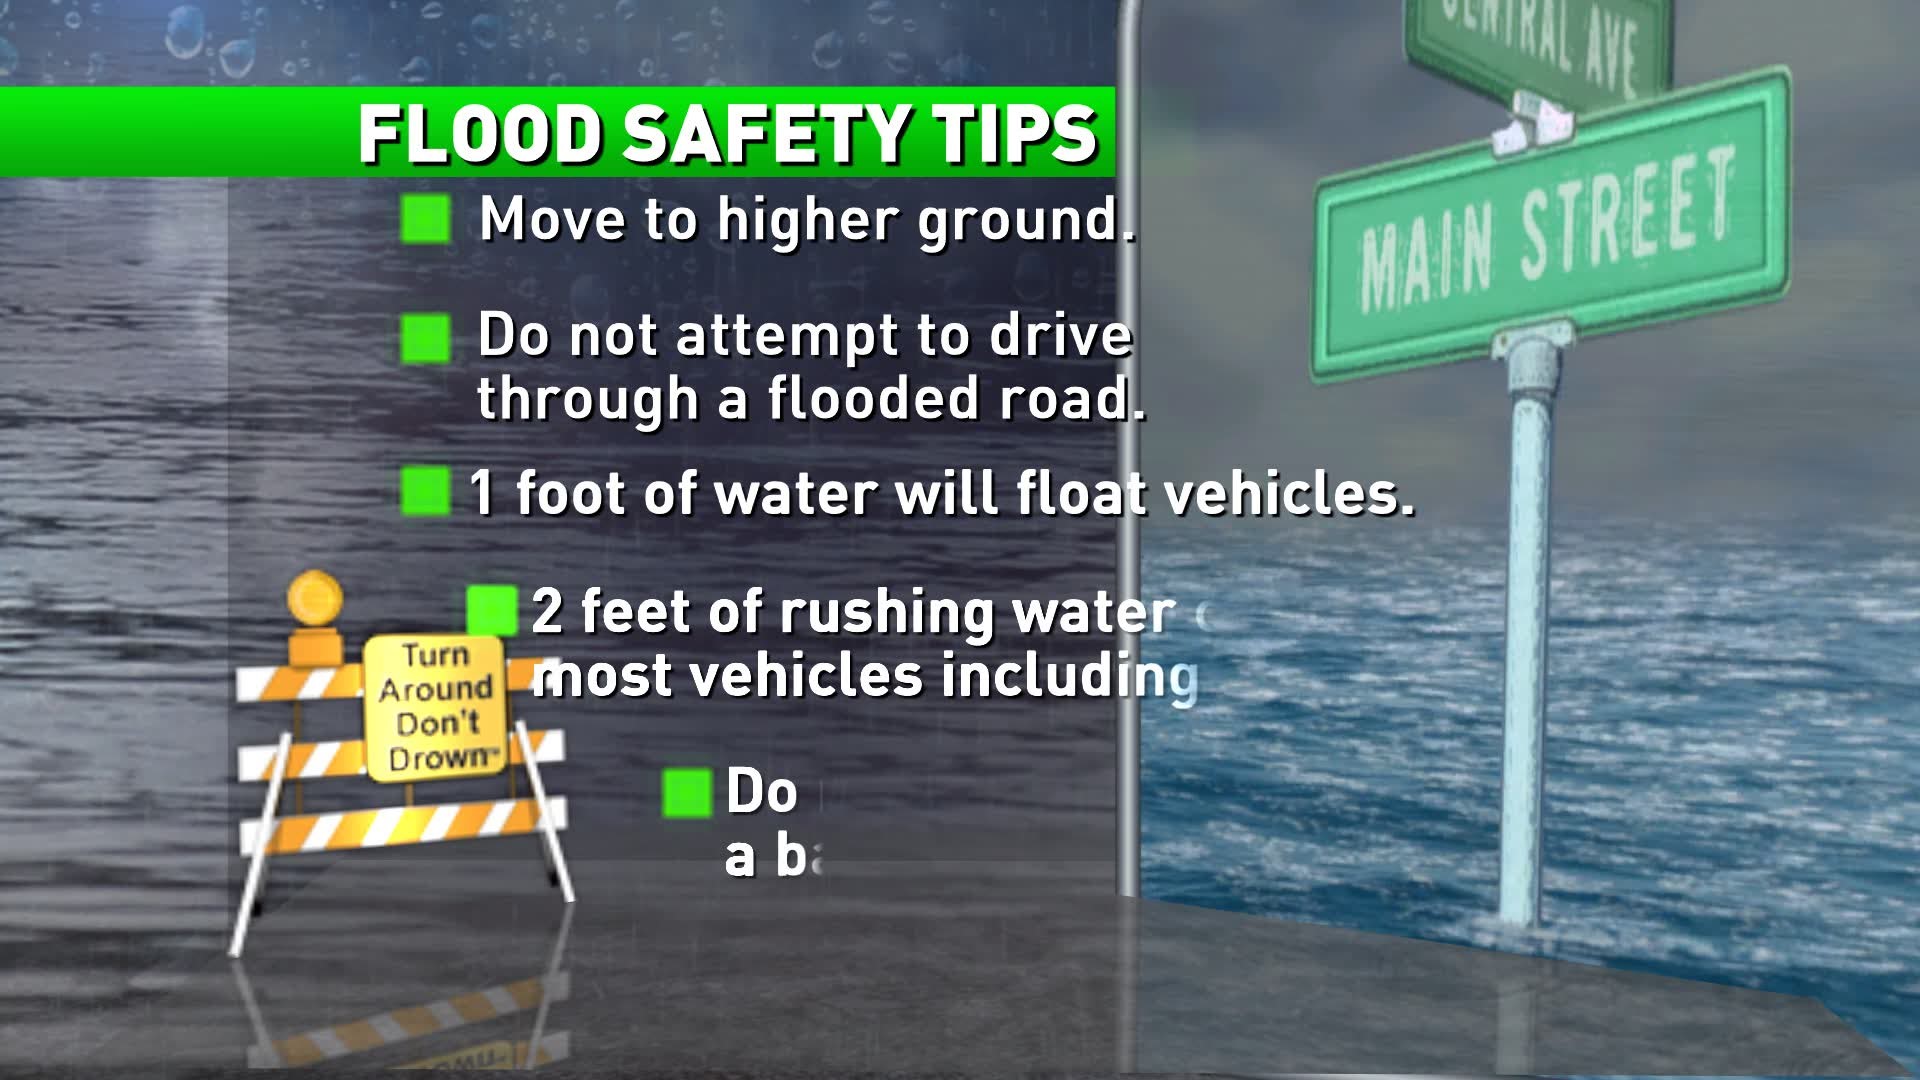 Tropical Storm Florence is expected to cause widespread flooding across the Carolinas. Here's what you should do if flooding is in your area.